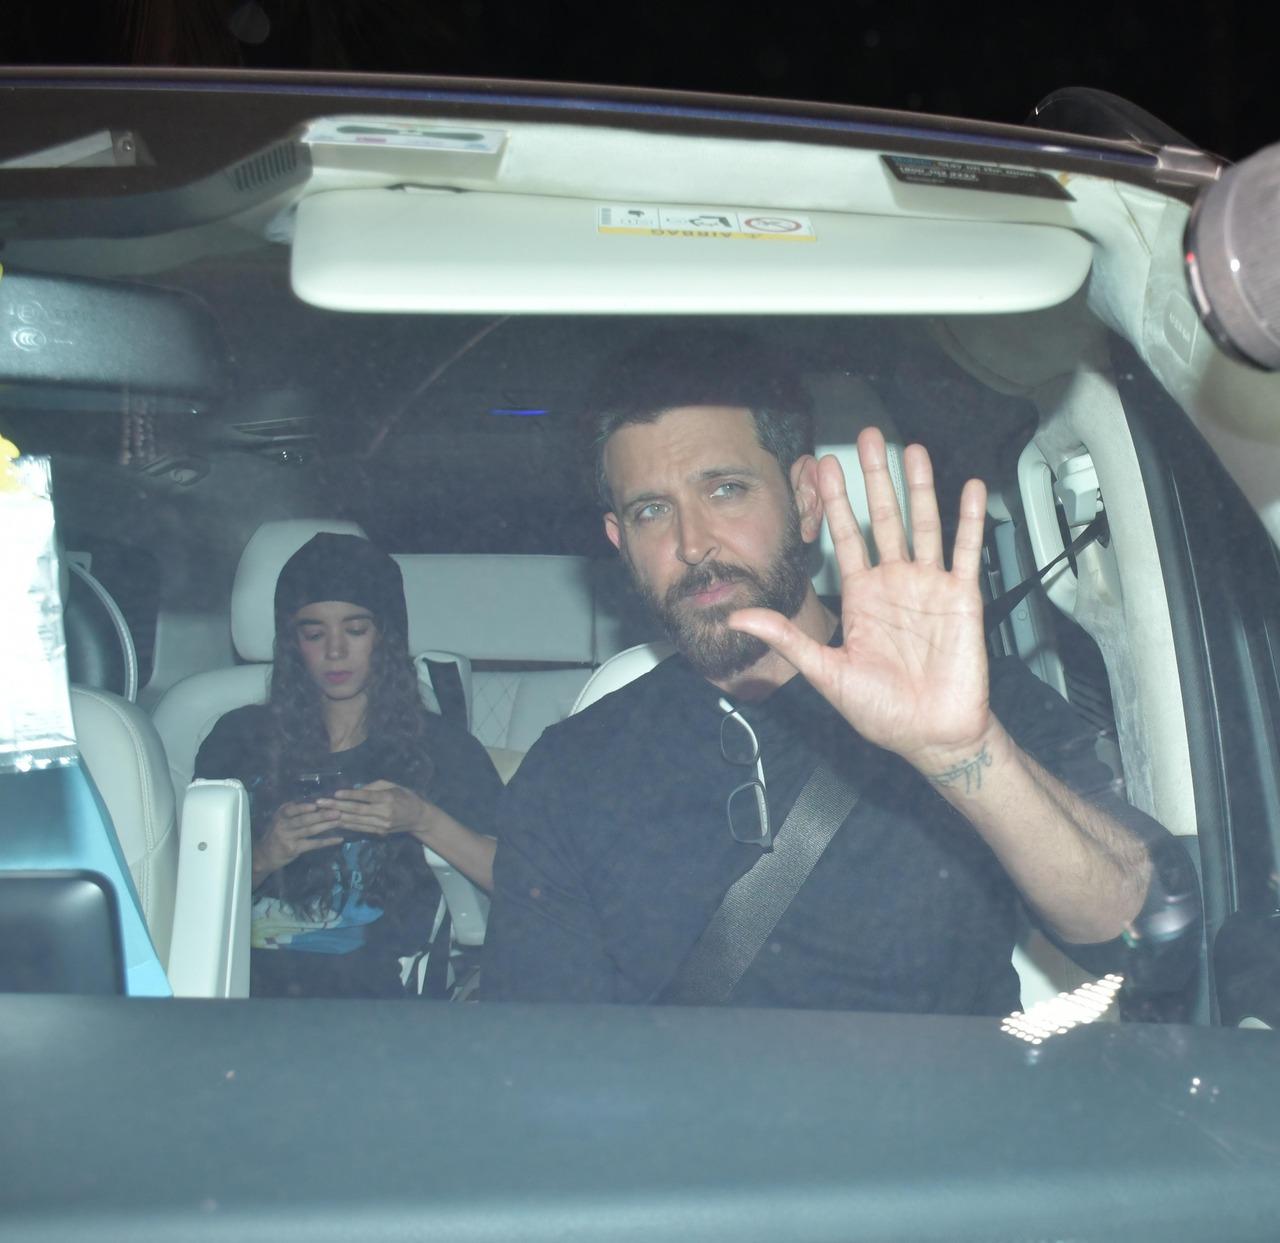 After the screening, Hrithik Roshan was spotted leaving with his ladylove Saba Azad